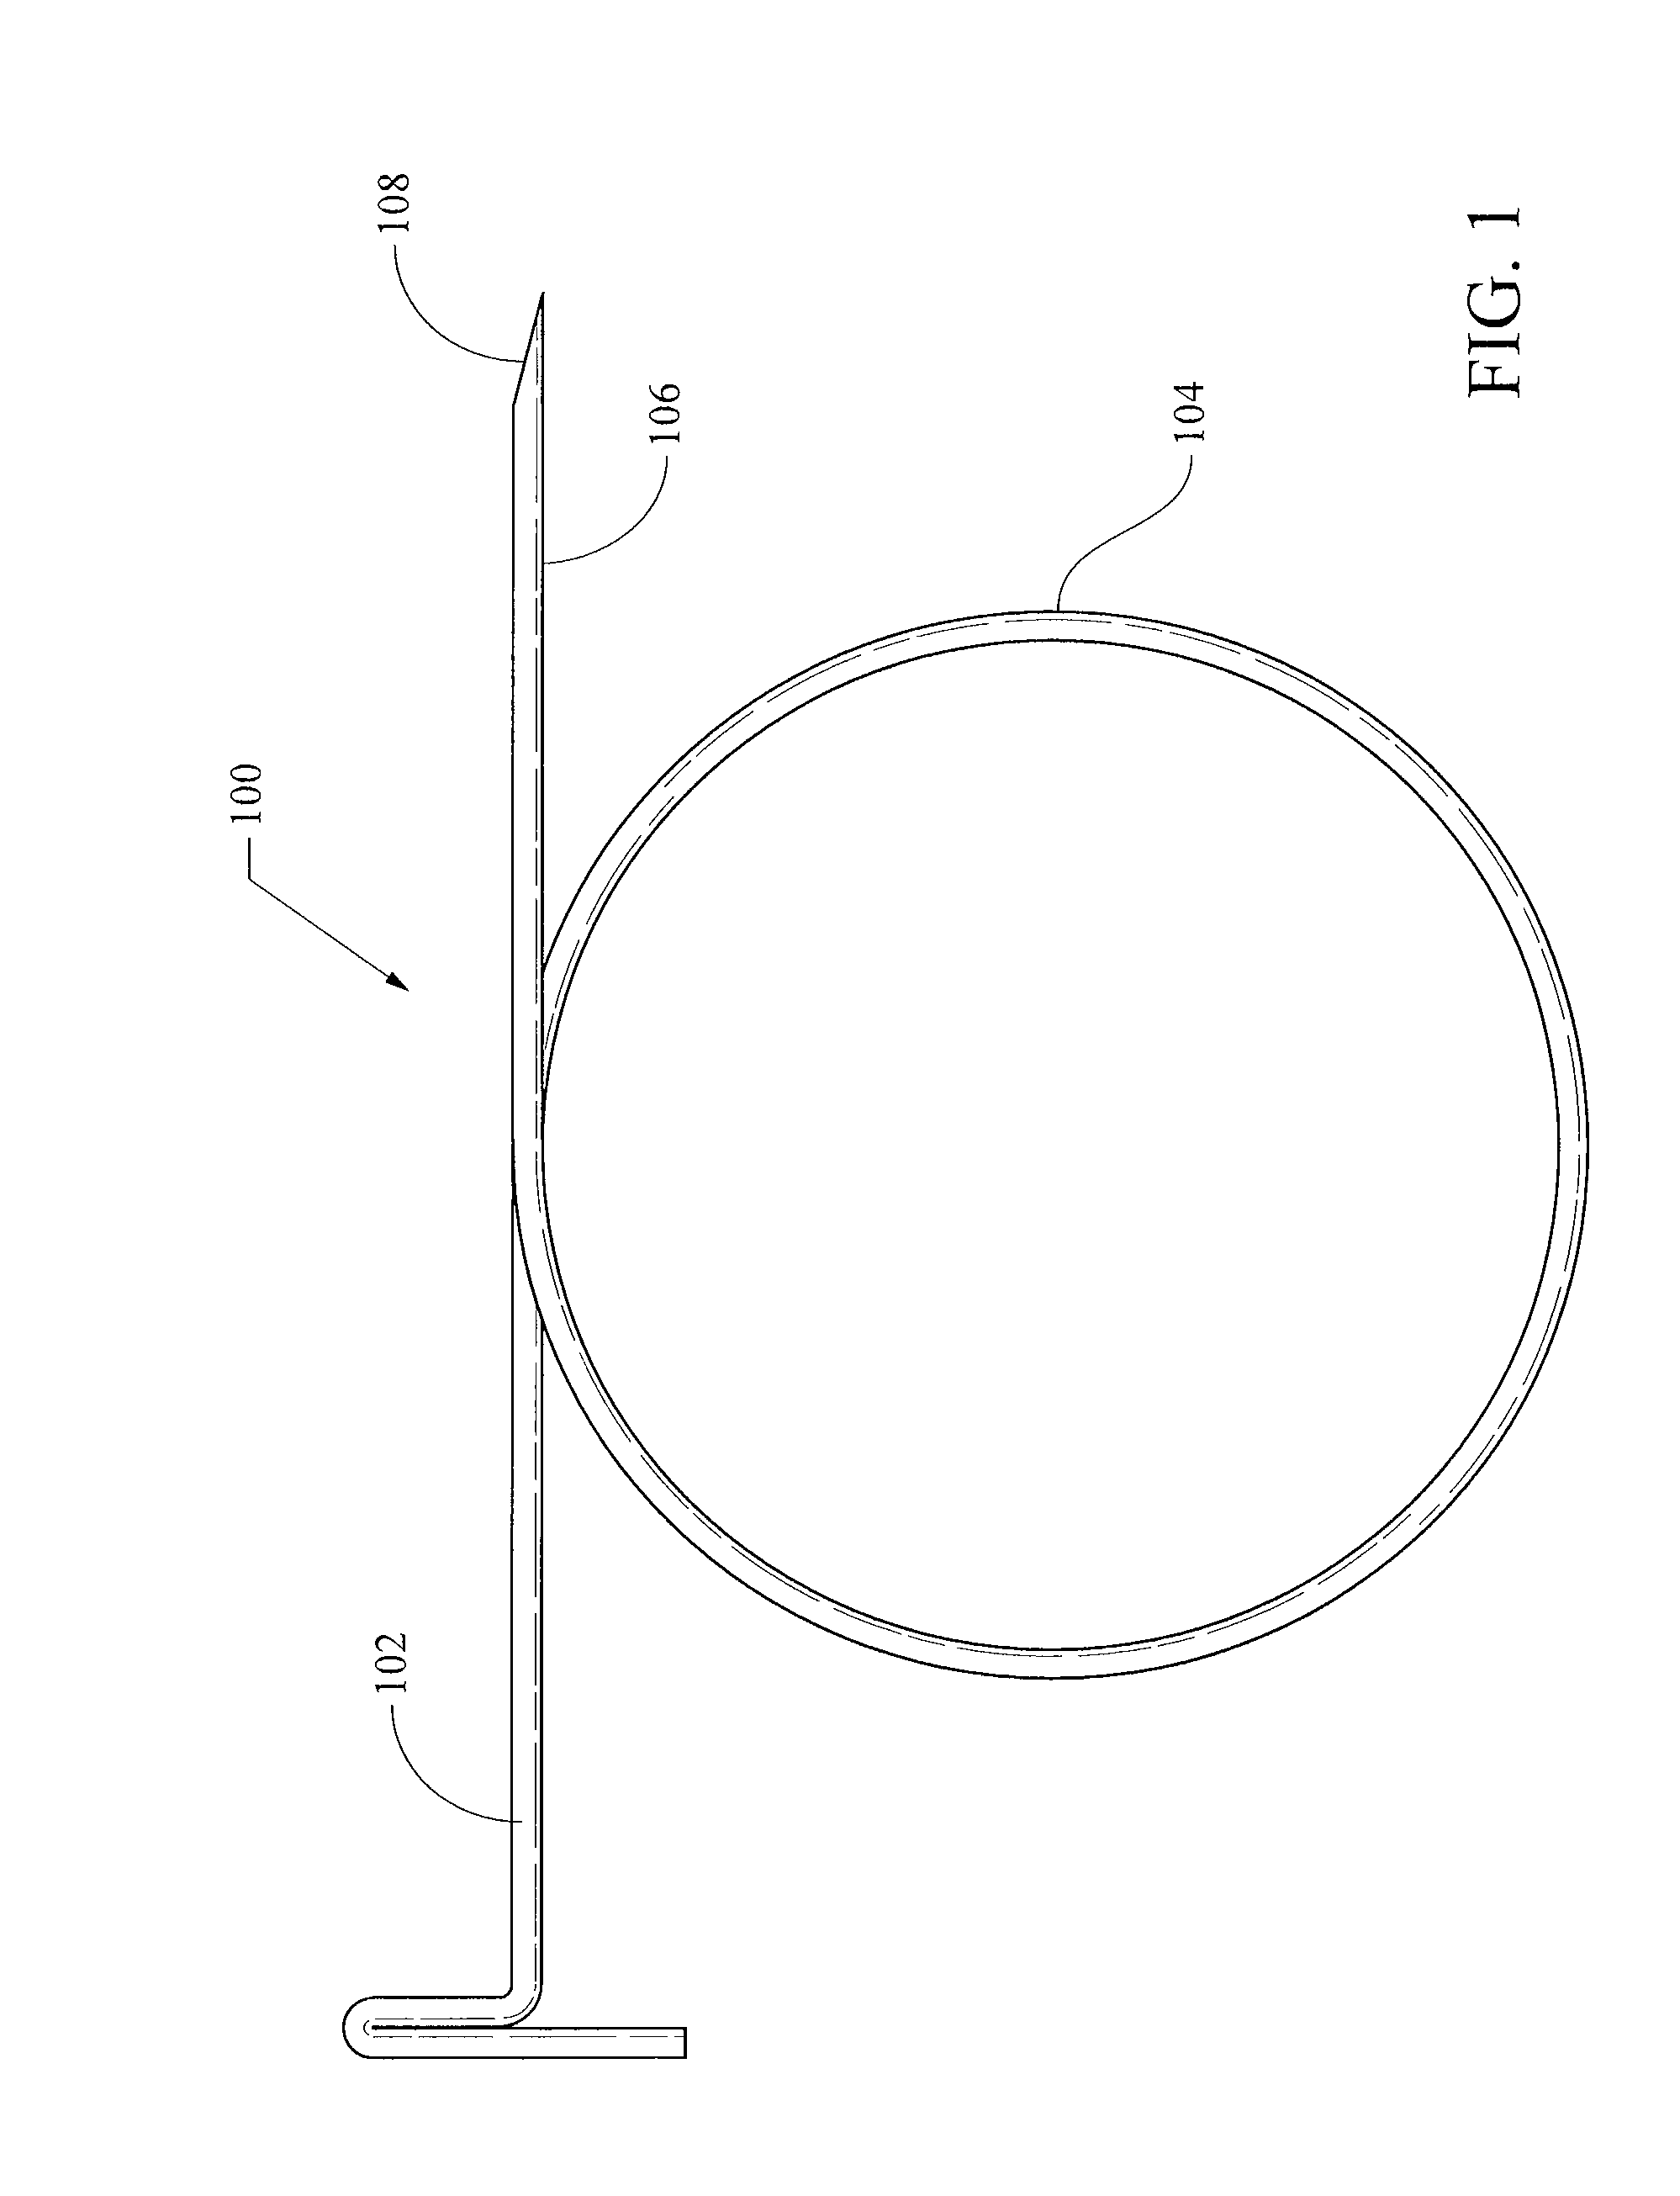 Self-coiling stylet needle device